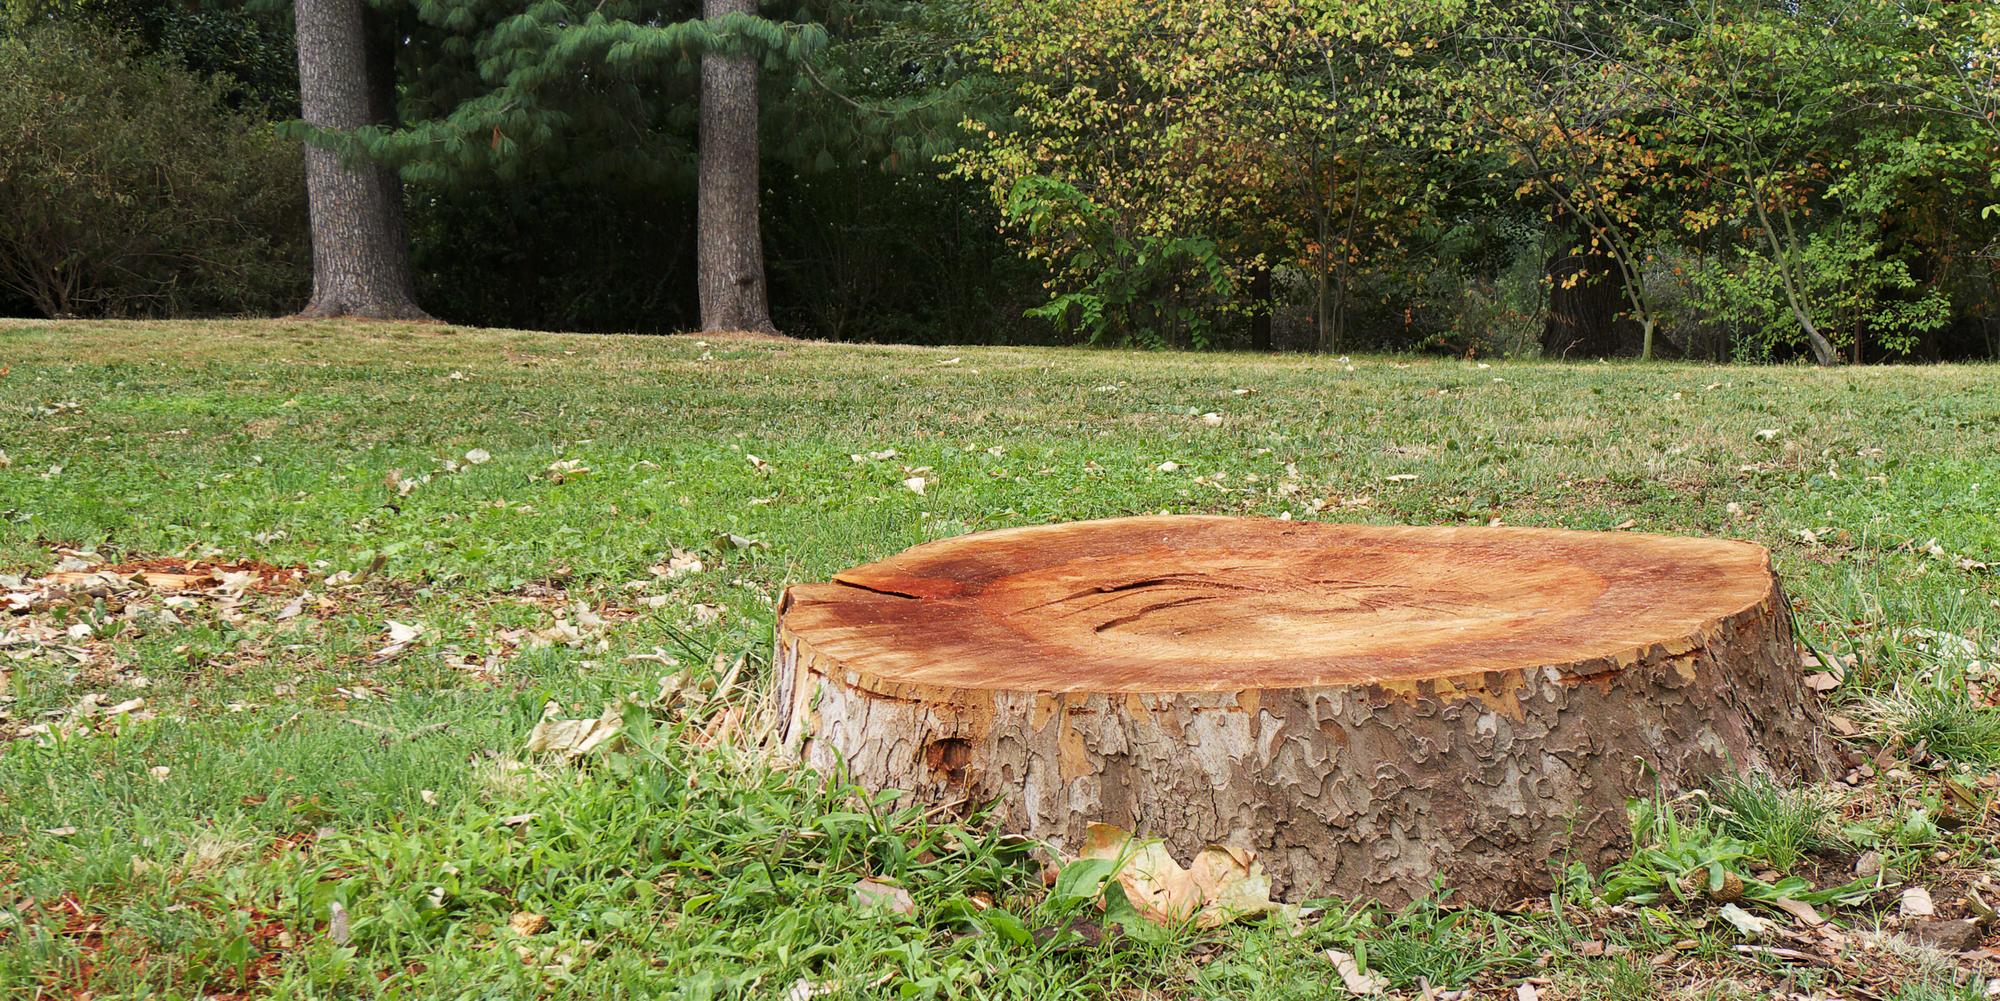 What happens if you do not grind a tree stump?